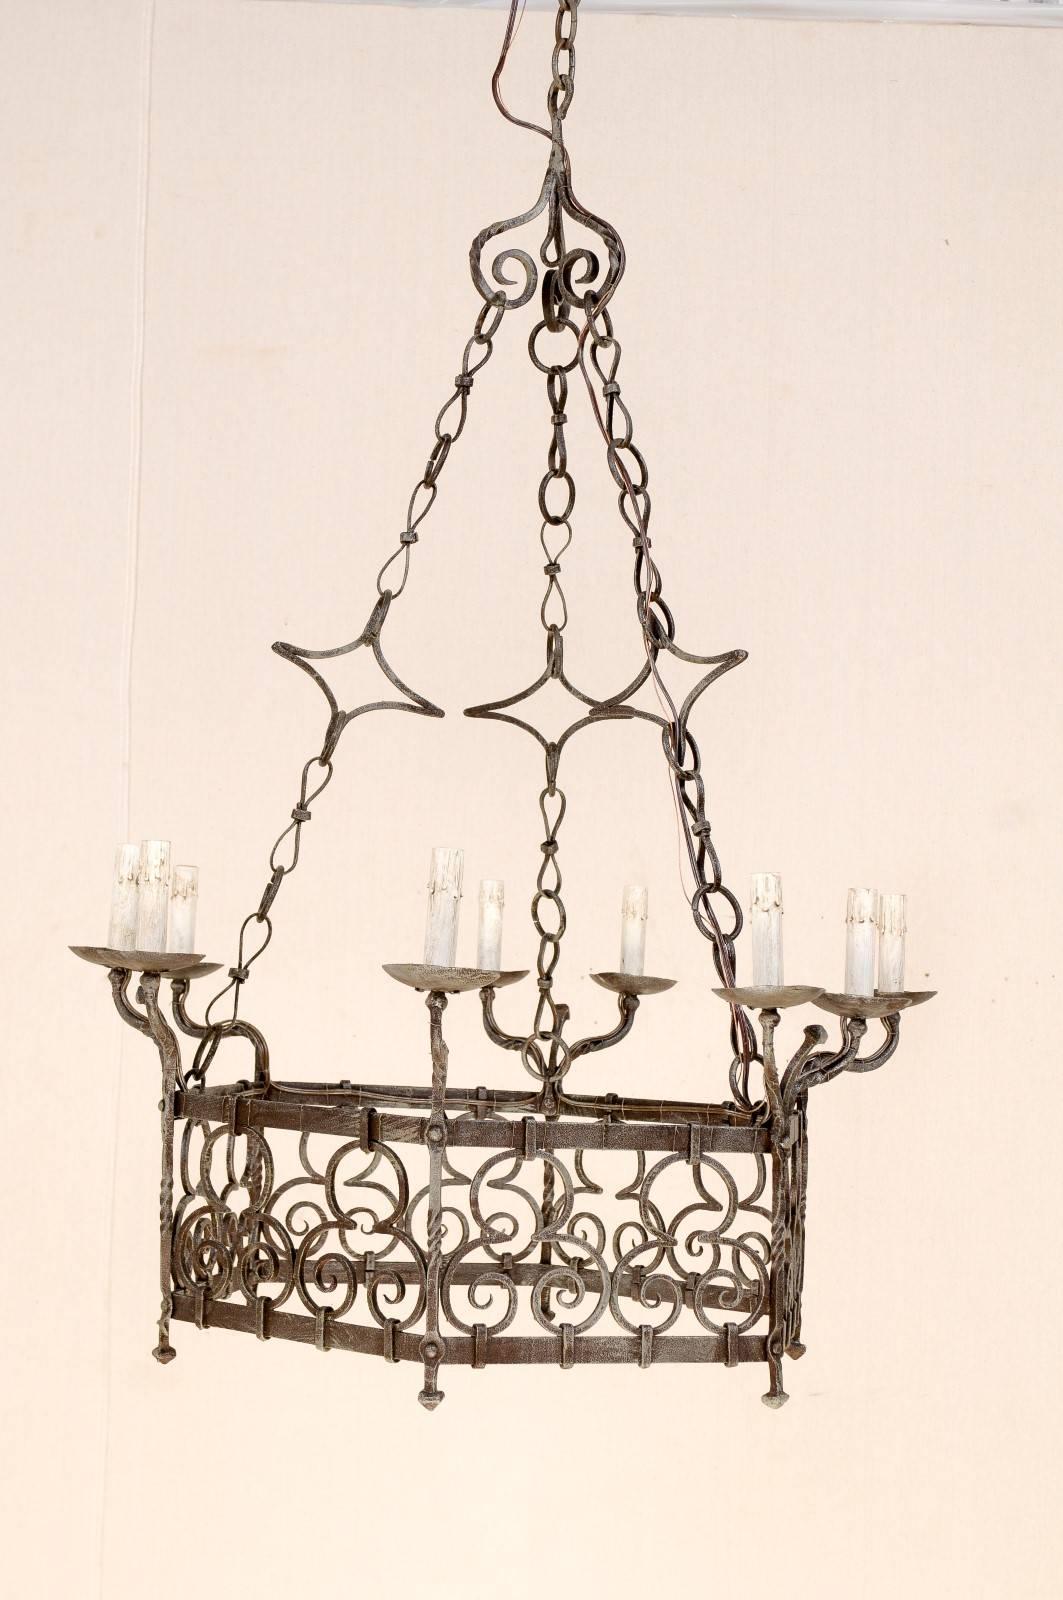 A French Gothic style nine-light iron vintage chandelier. This French chandelier from the mid-20th century has a hexagonal ring with scrolled designs. The lights are rotated in single and then double posts that curve up and away from the centre. The